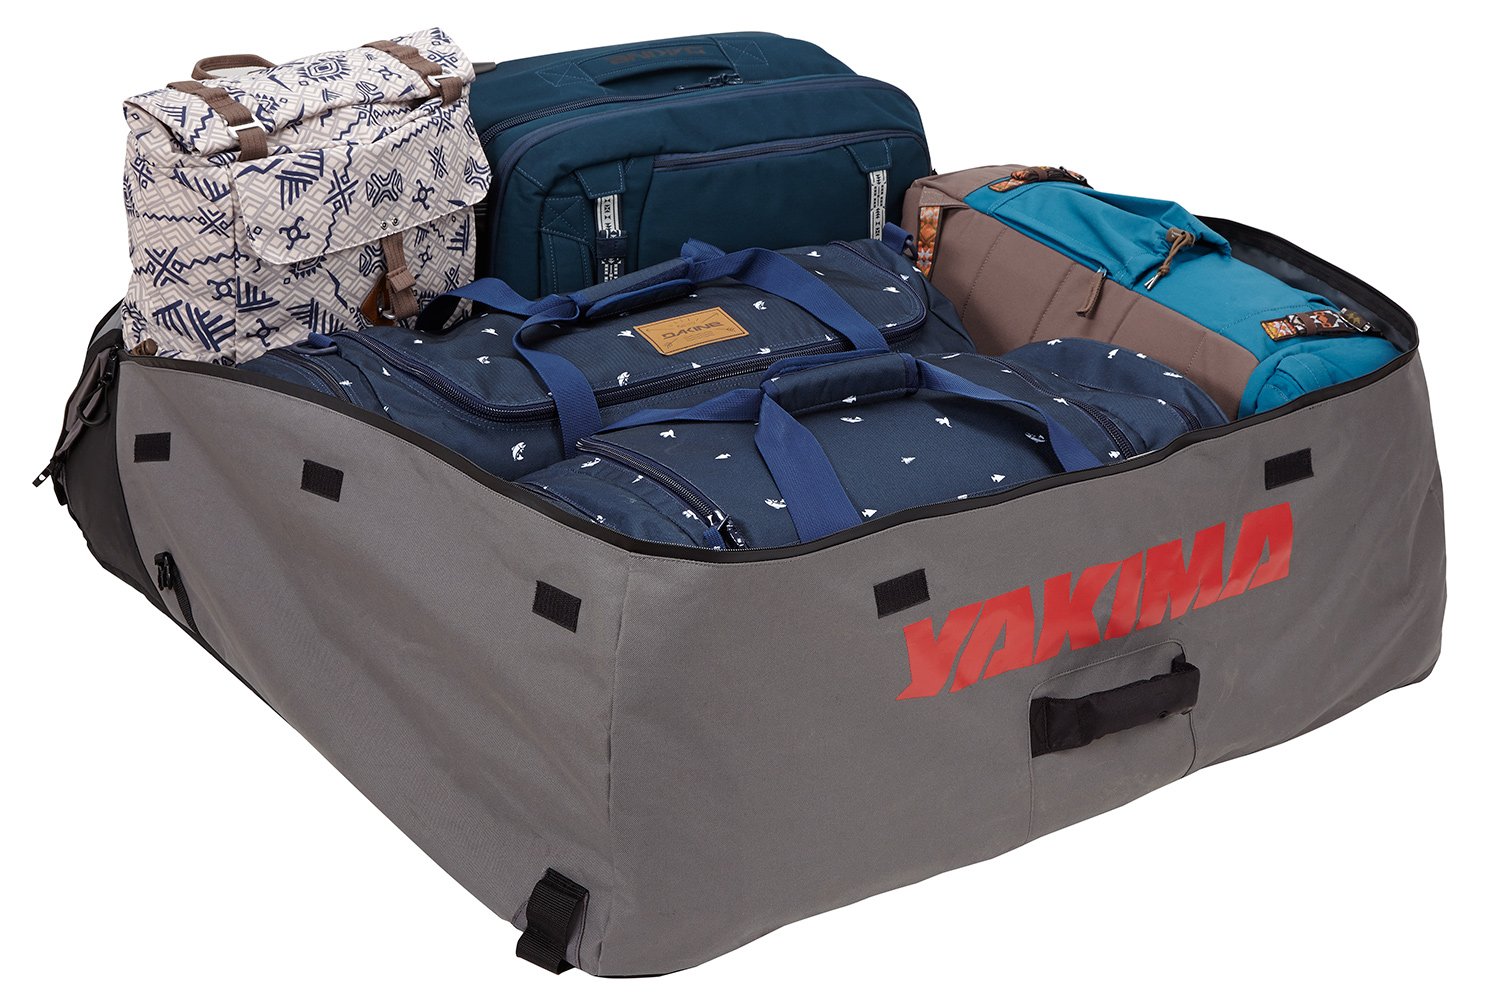 Yakima DryTop Rooftop Cargo Bag - Roof Luggage Carrier